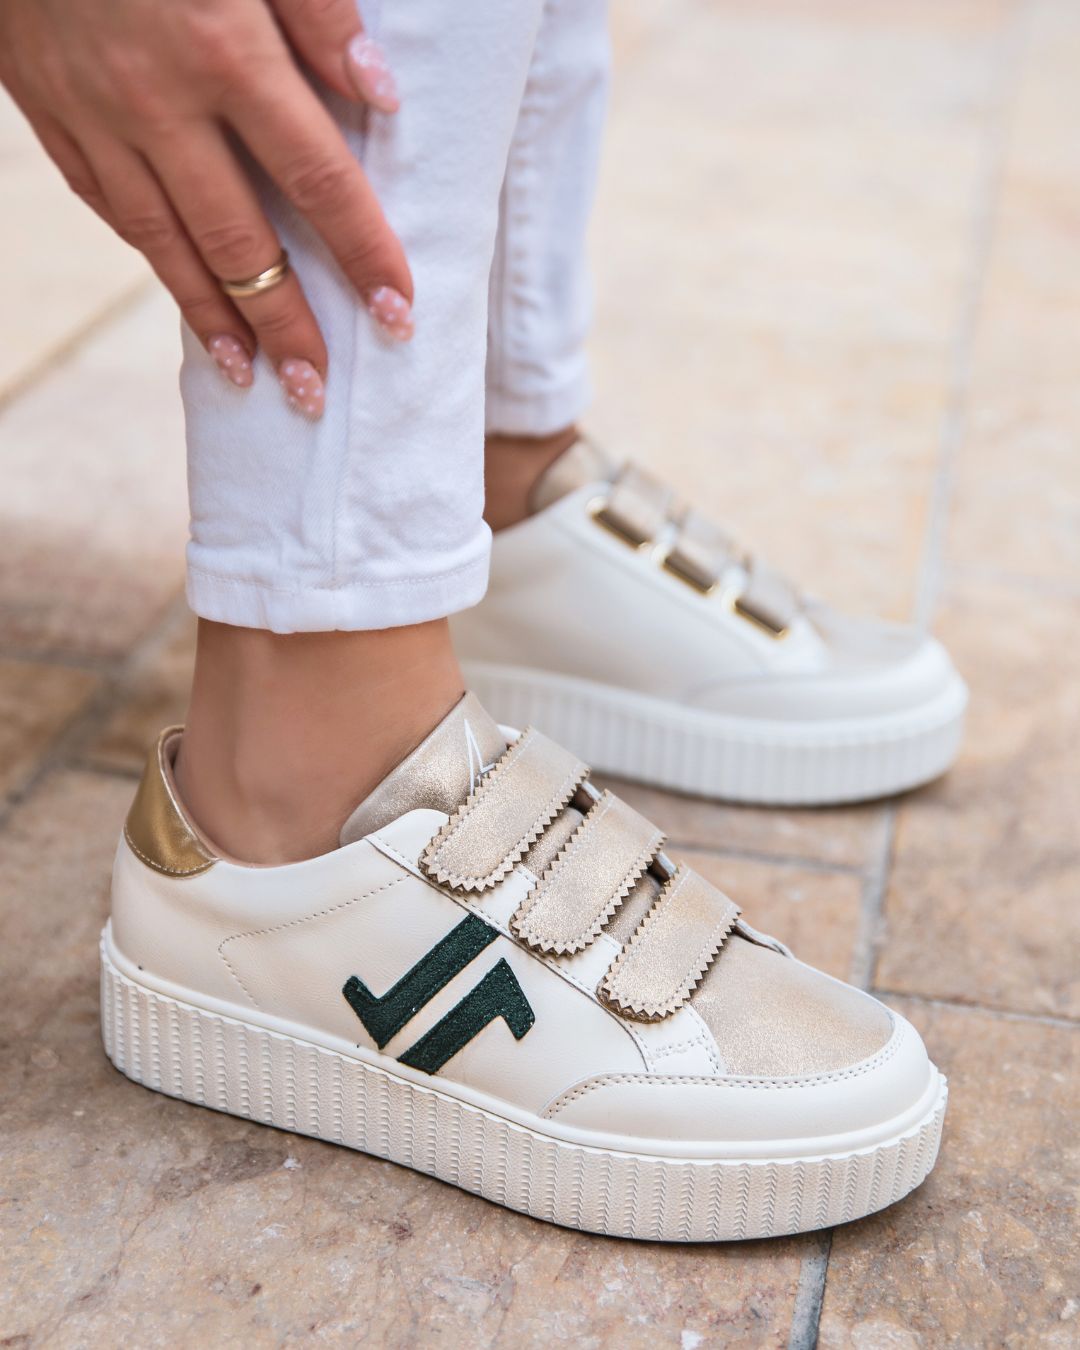 Basket femme blanche creepers à scratch - CL73 GREEN - Casualmode.fr